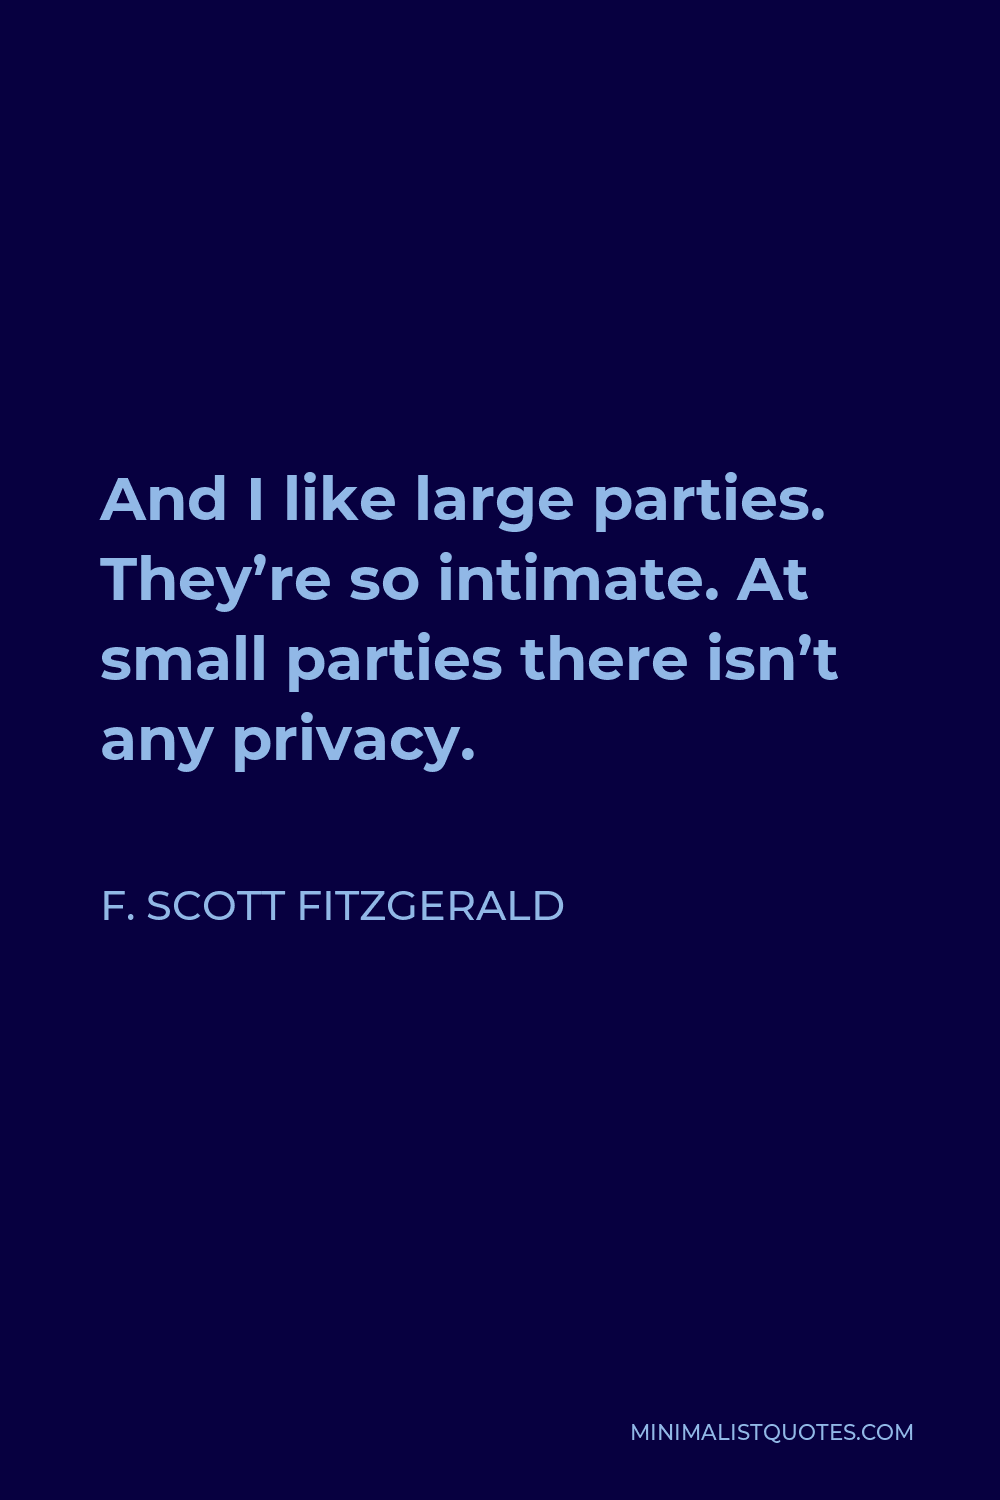 F. Scott Fitzgerald Quote - And I like large parties. They’re so intimate. At small parties there isn’t any privacy.